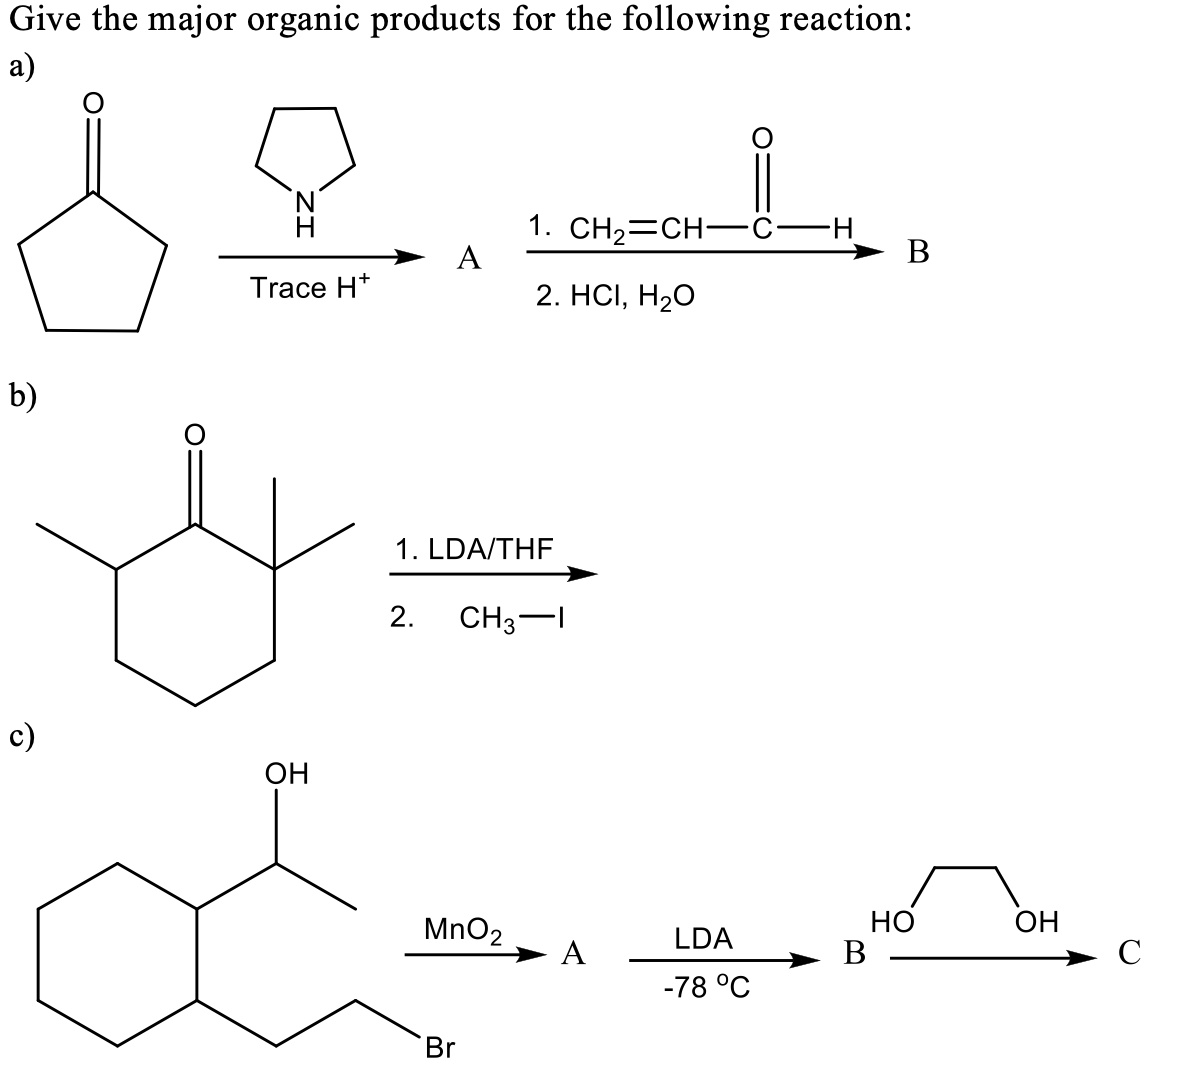 Give the major organic products for the following reaction:
a)
1. CH23CH- с—н
A
H
B
Trace H*
2. HСІ, Н20
b)
1. LDA/THF
2.
CH3-I
c)
OH
но
В
MnO2
LDA
OH
A
C
-78 °C
Br
